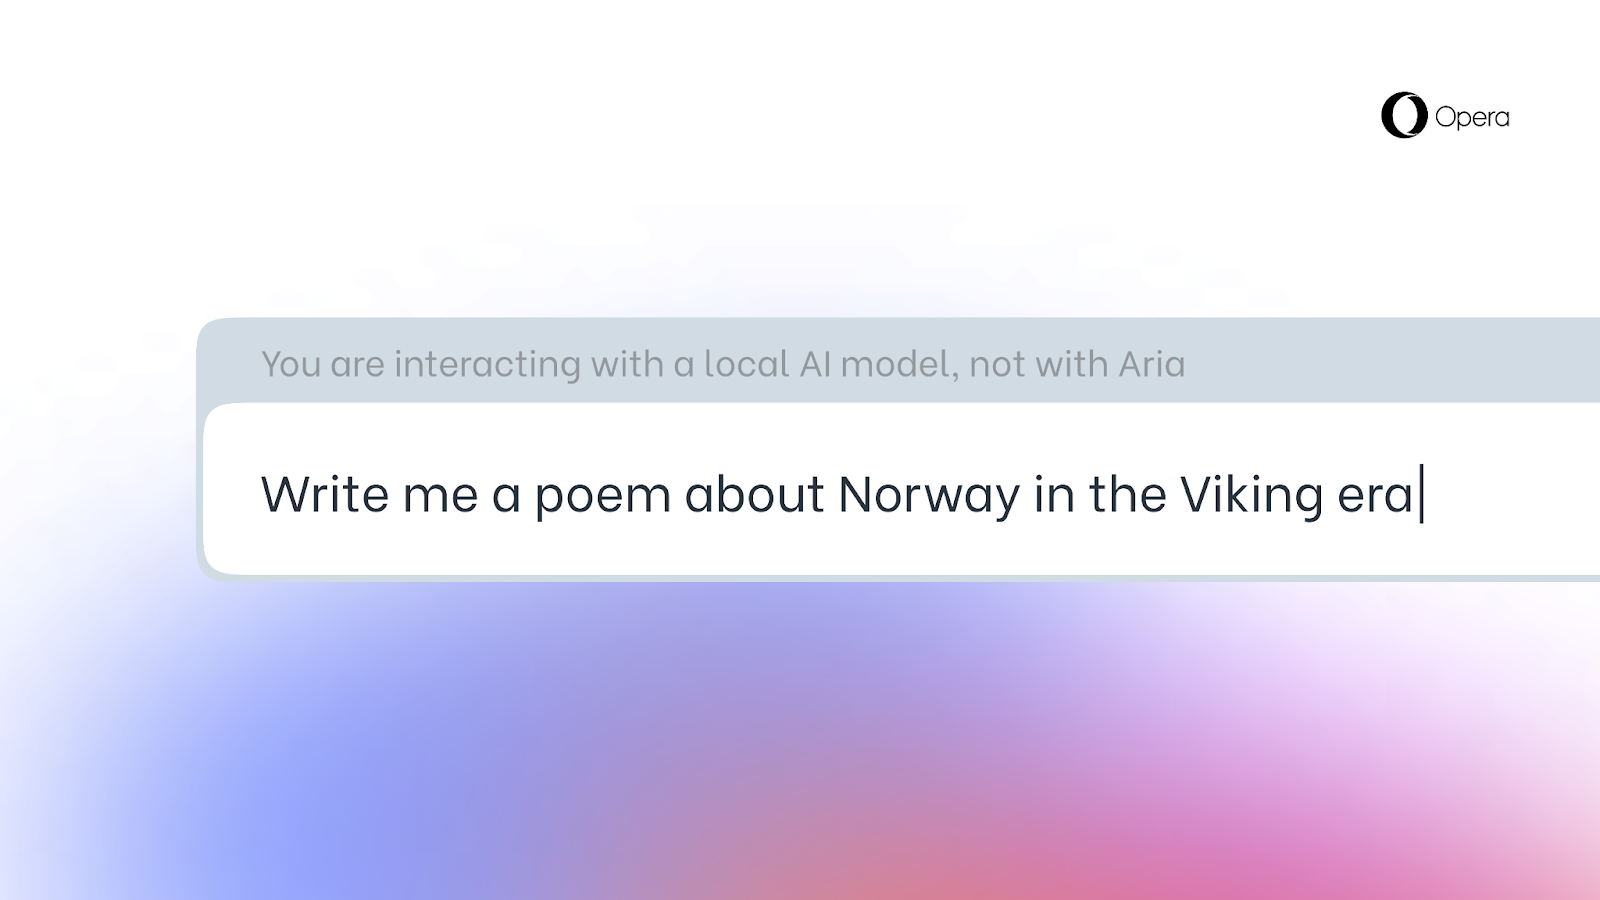 A user instructs a local AI model to write a poem.